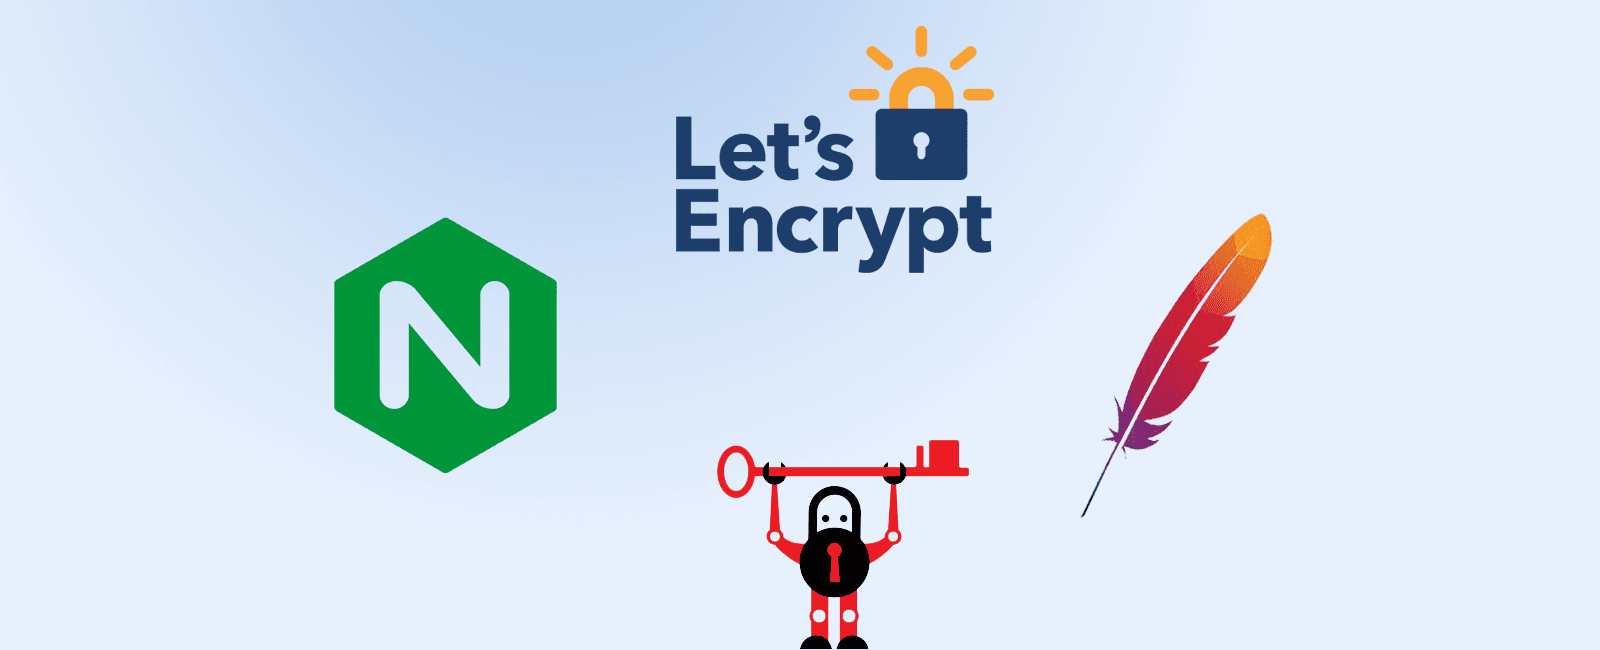 Installing Free SSL Certificate Using Let’s Encrypt and Certbot